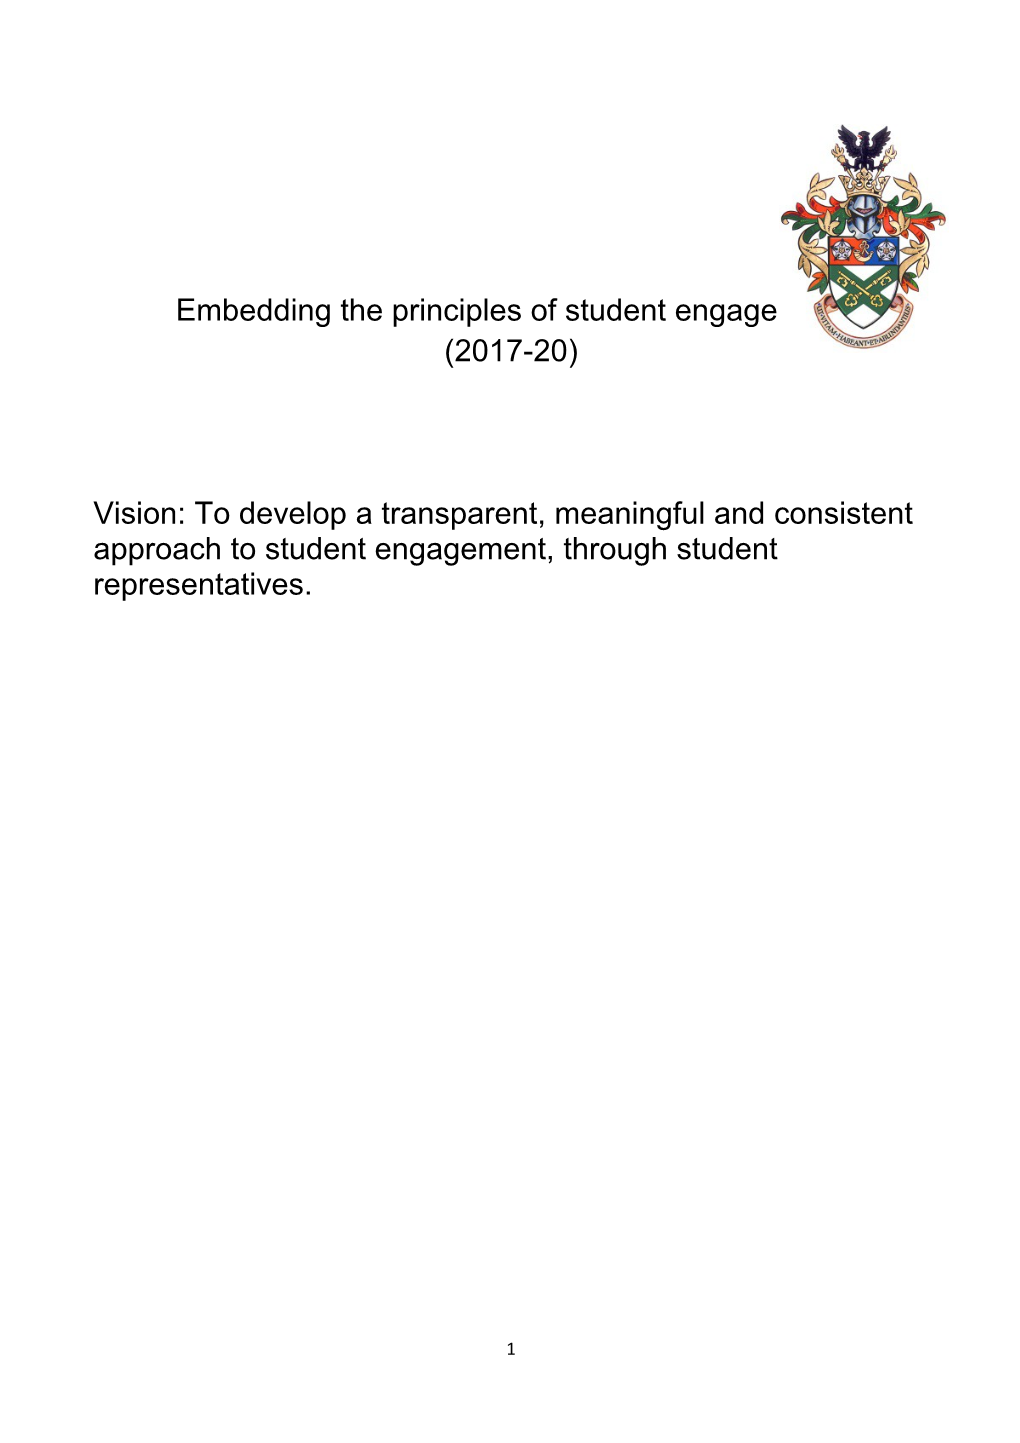 Embedding the Principles of Student Engagement